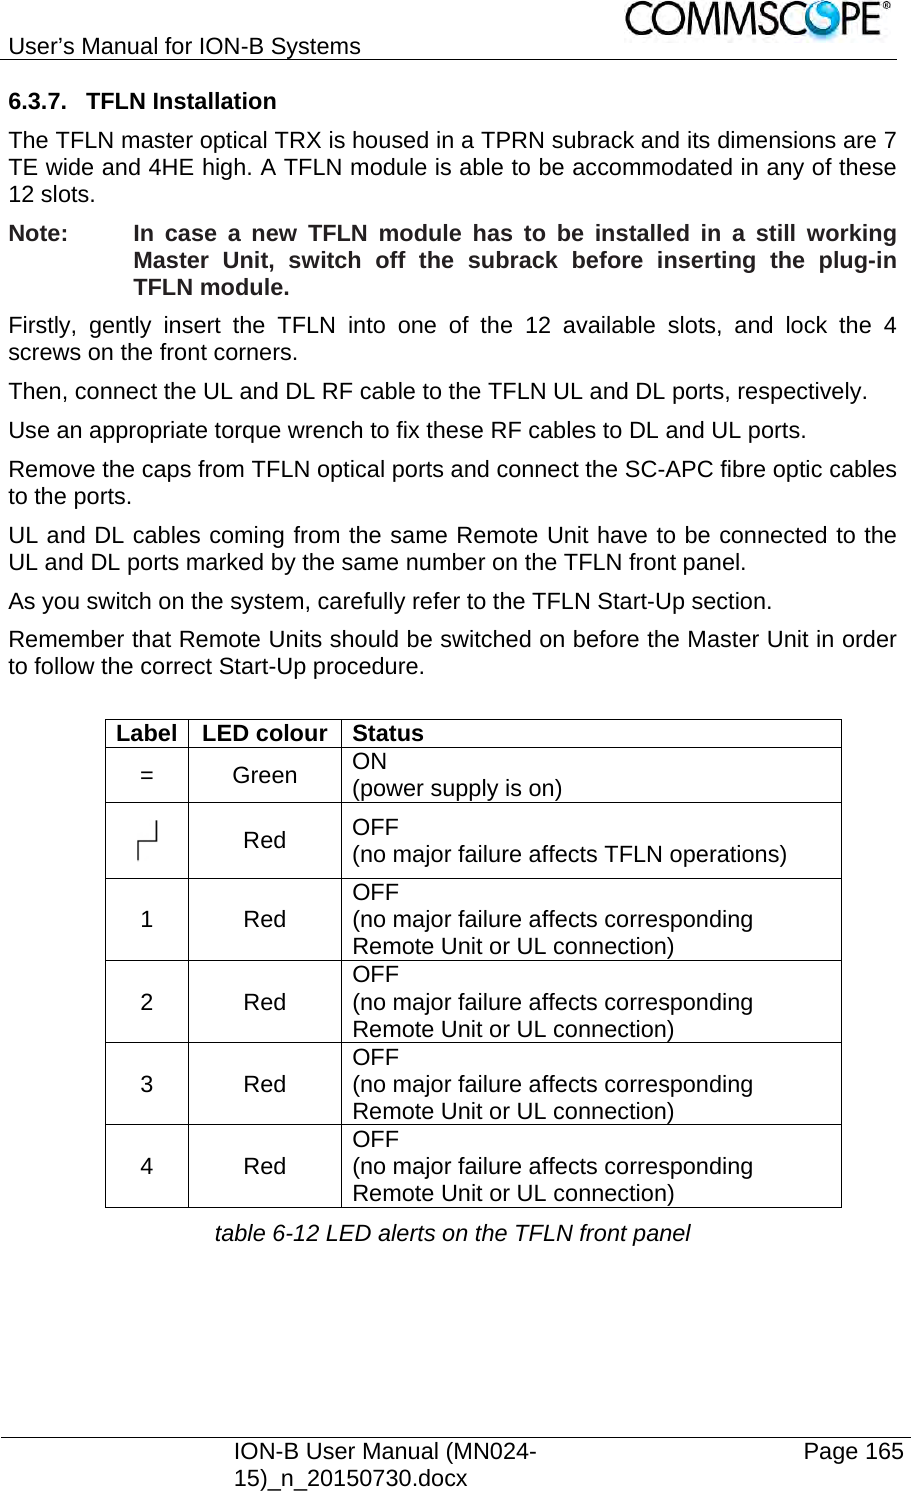 User’s Manual for ION-B Systems    ION-B User Manual (MN024-15)_n_20150730.docx  Page 165 6.3.7. TFLN Installation The TFLN master optical TRX is housed in a TPRN subrack and its dimensions are 7 TE wide and 4HE high. A TFLN module is able to be accommodated in any of these 12 slots. Note:  In case a new TFLN module has to be installed in a still working Master Unit, switch off the subrack before inserting the plug-in TFLN module.  Firstly, gently insert the TFLN into one of the 12 available slots, and lock the 4 screws on the front corners. Then, connect the UL and DL RF cable to the TFLN UL and DL ports, respectively.  Use an appropriate torque wrench to fix these RF cables to DL and UL ports. Remove the caps from TFLN optical ports and connect the SC-APC fibre optic cables to the ports. UL and DL cables coming from the same Remote Unit have to be connected to the UL and DL ports marked by the same number on the TFLN front panel.  As you switch on the system, carefully refer to the TFLN Start-Up section.  Remember that Remote Units should be switched on before the Master Unit in order to follow the correct Start-Up procedure.  Label LED colour Status = Green ON (power supply is on)  Red  OFF (no major failure affects TFLN operations) 1 Red OFF (no major failure affects corresponding Remote Unit or UL connection) 2 Red OFF (no major failure affects corresponding Remote Unit or UL connection) 3 Red OFF (no major failure affects corresponding Remote Unit or UL connection) 4 Red OFF (no major failure affects corresponding Remote Unit or UL connection)table 6-12 LED alerts on the TFLN front panel  